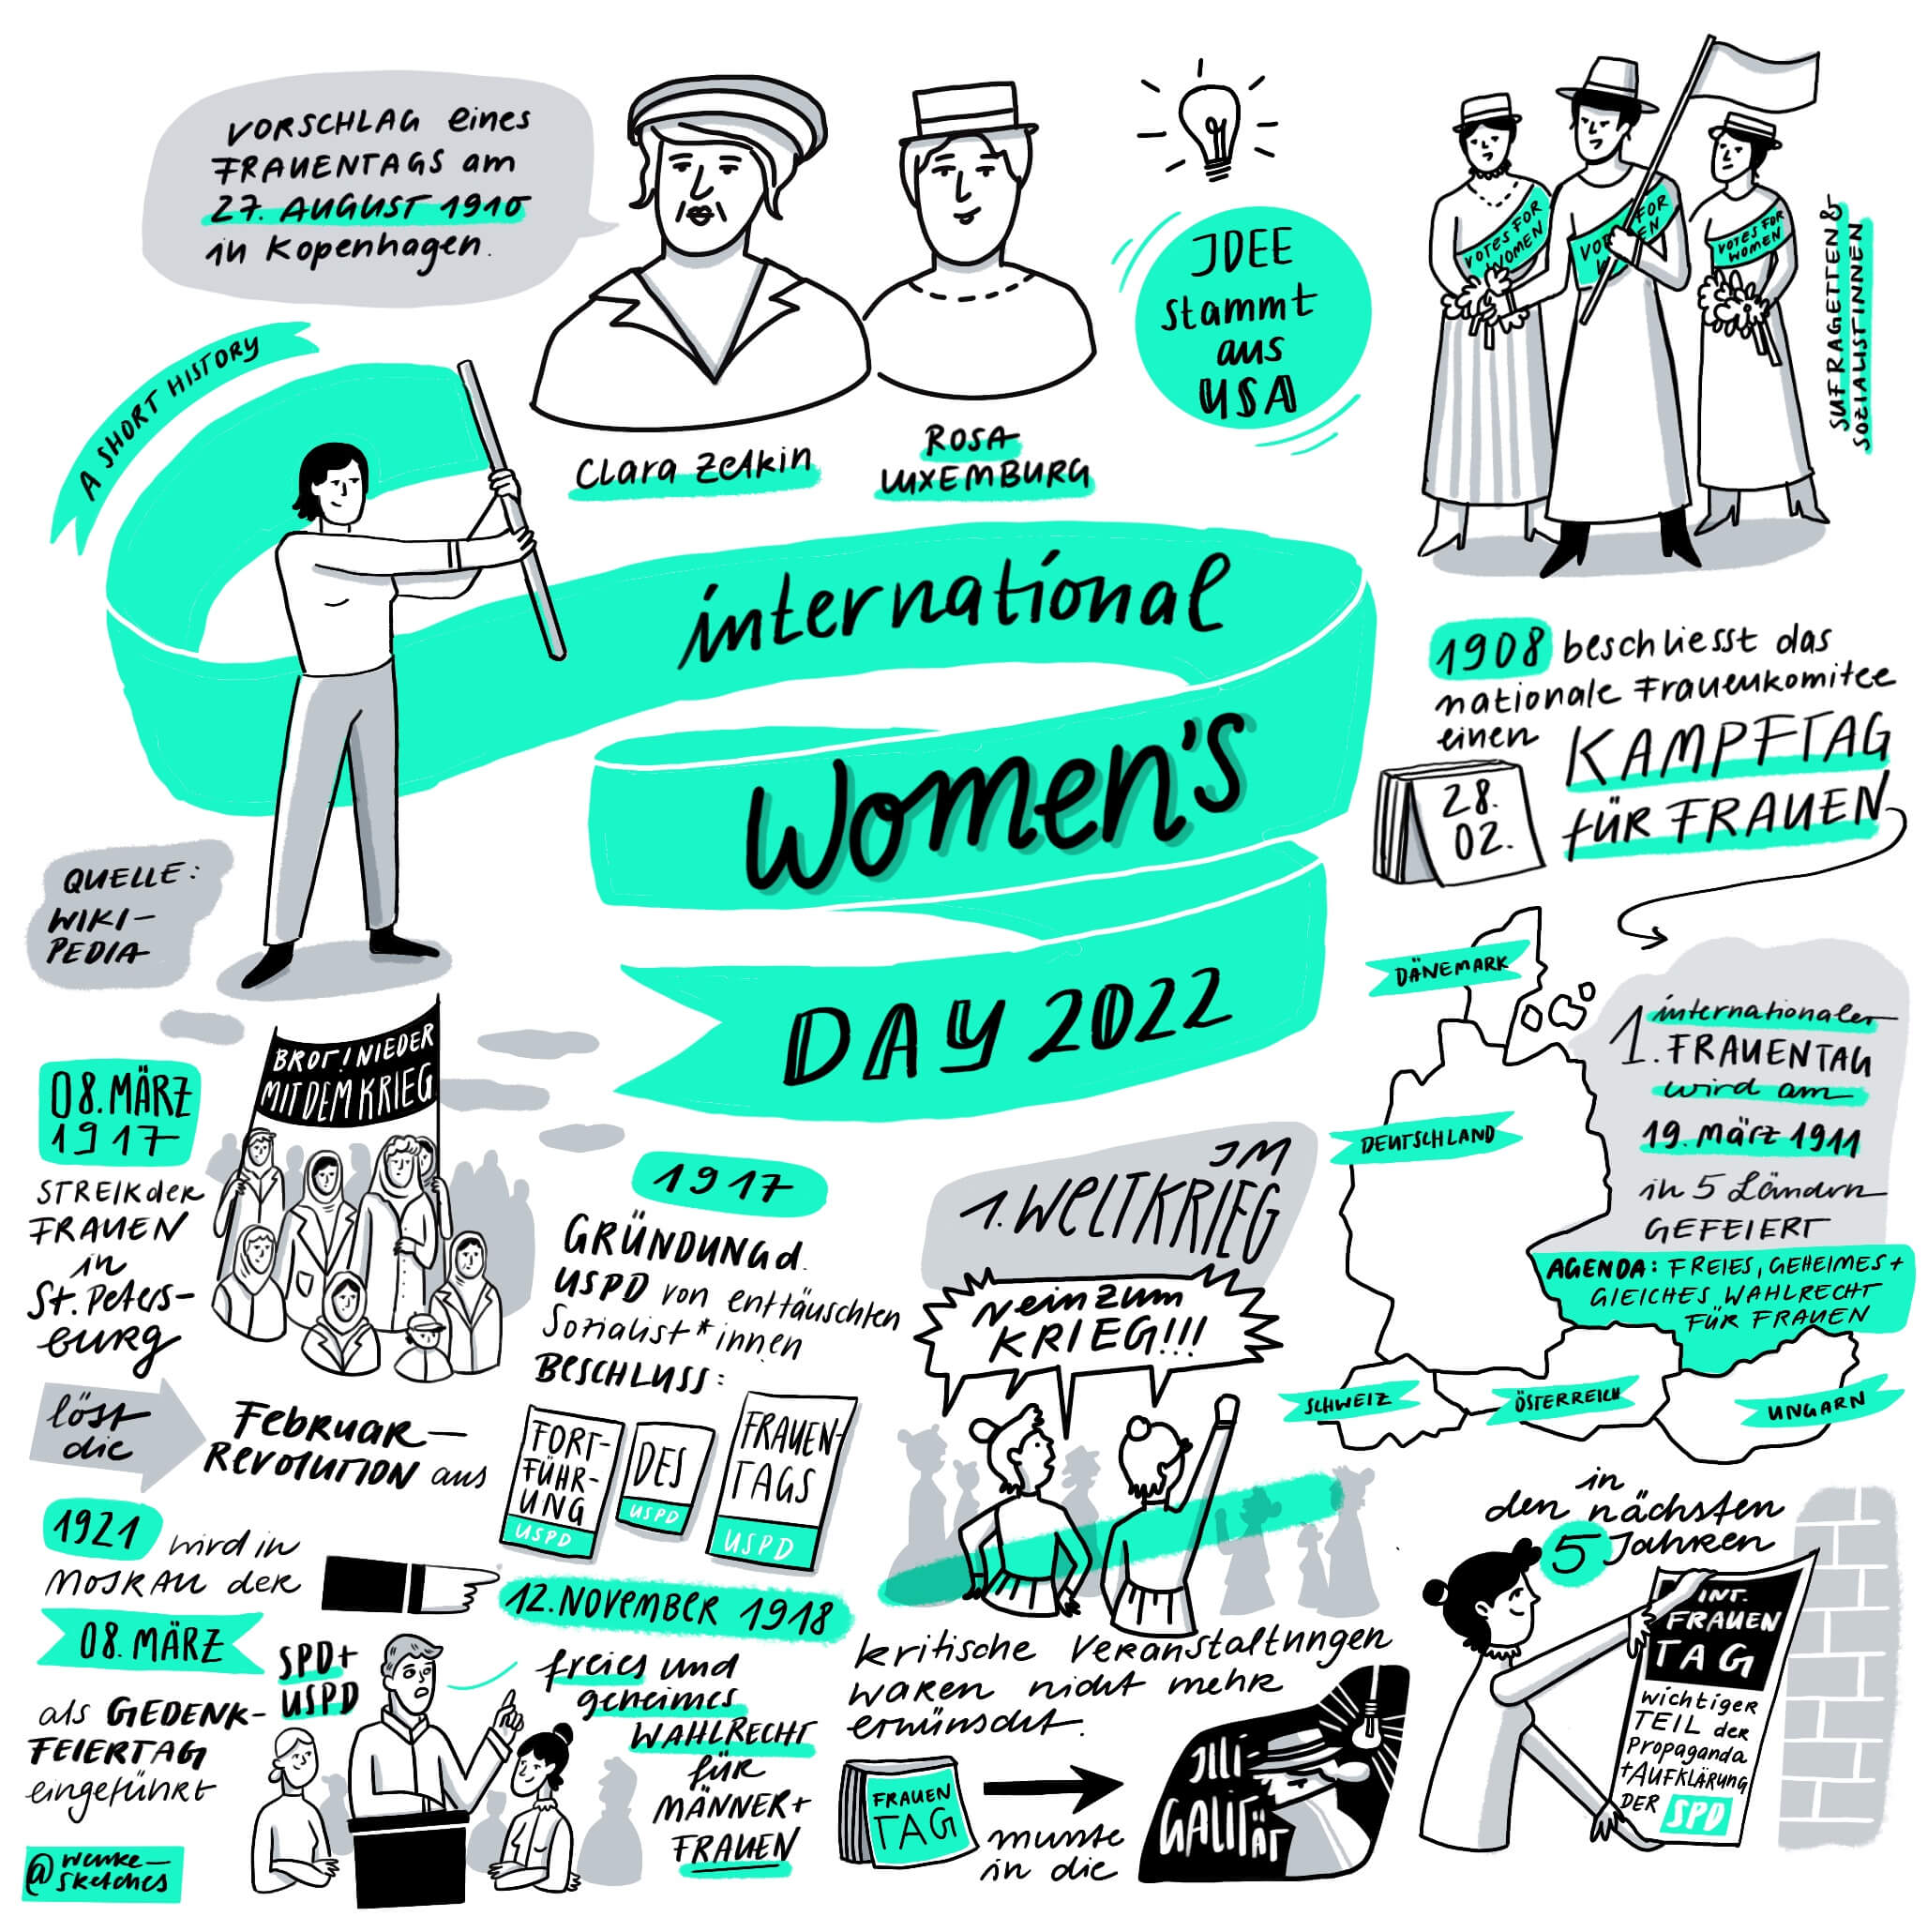 sketchnote and short history of the international womens day